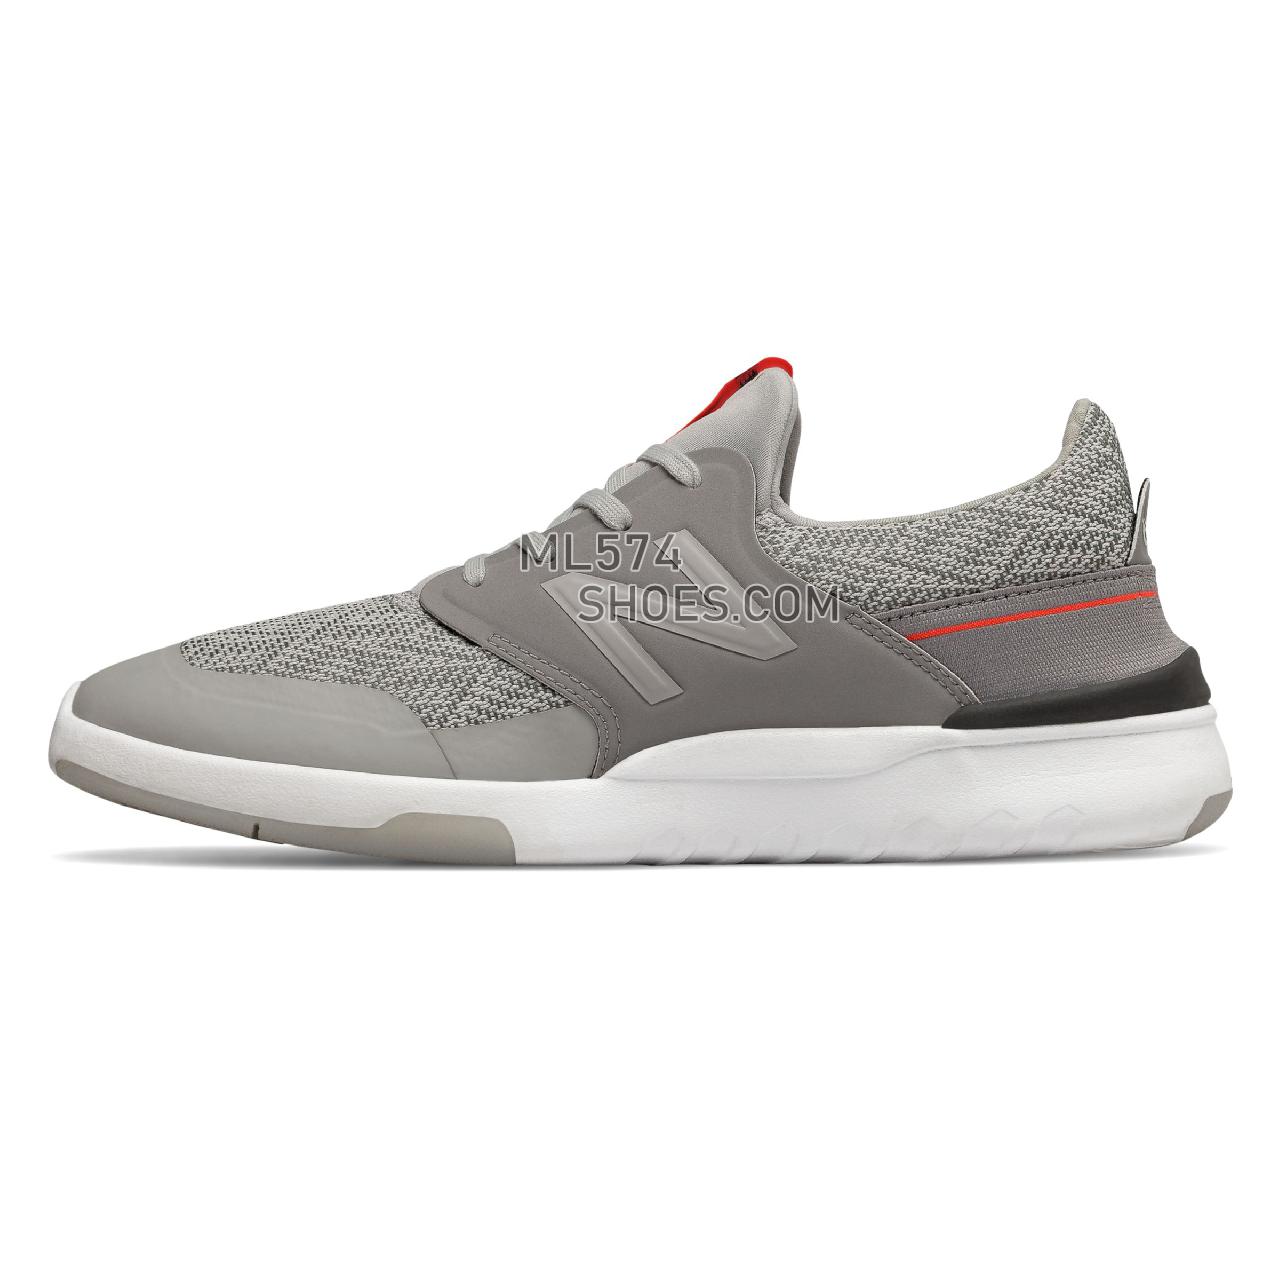 New Balance 659 - Men's 659 - Classic Grey with White - AM659PHC